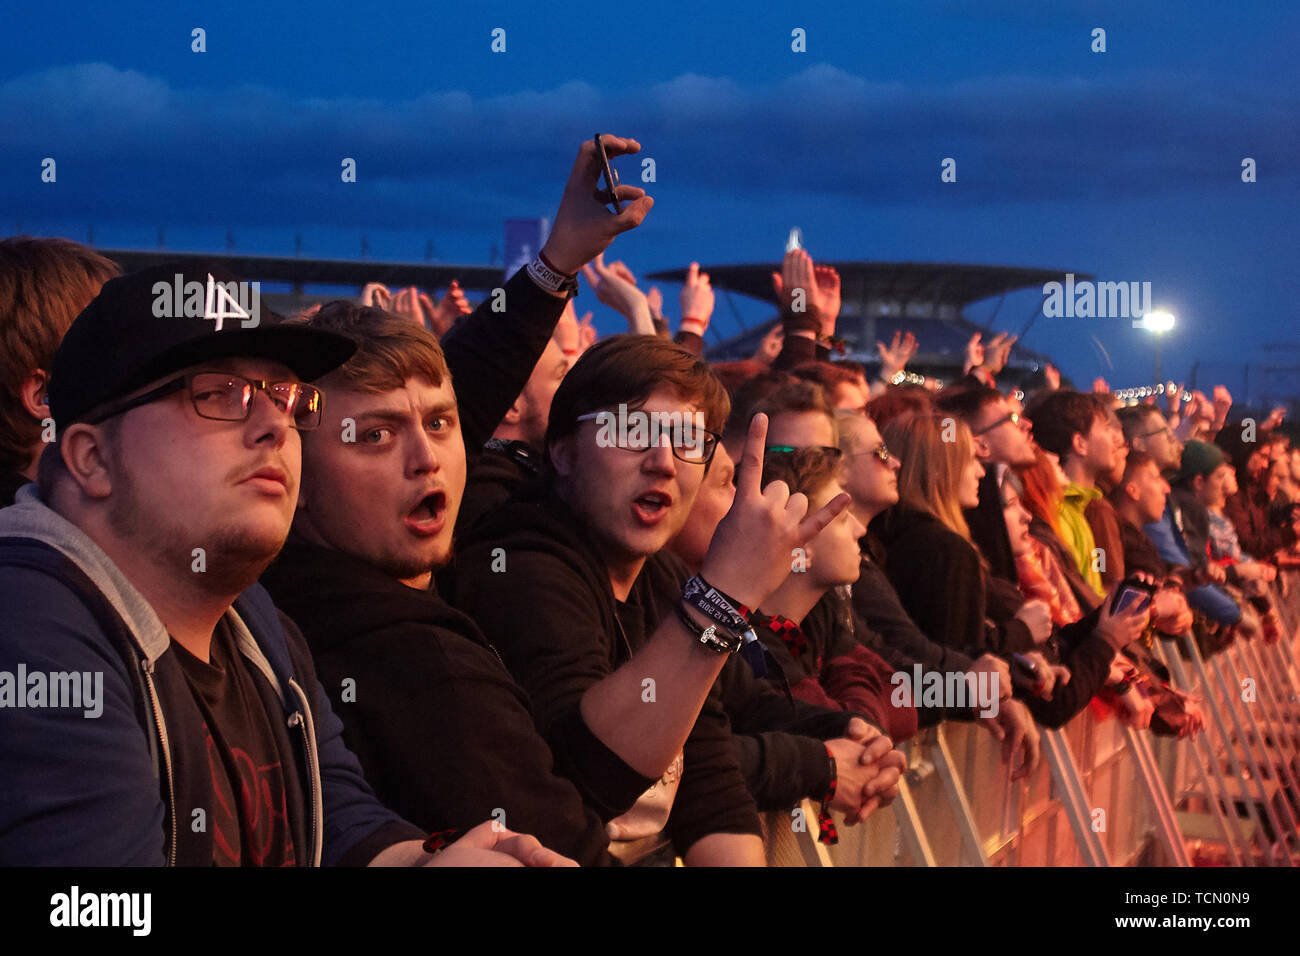 08 June 2019, Rhineland-Palatinate, Nürburg: Rock fans stand in front of  the stage at the